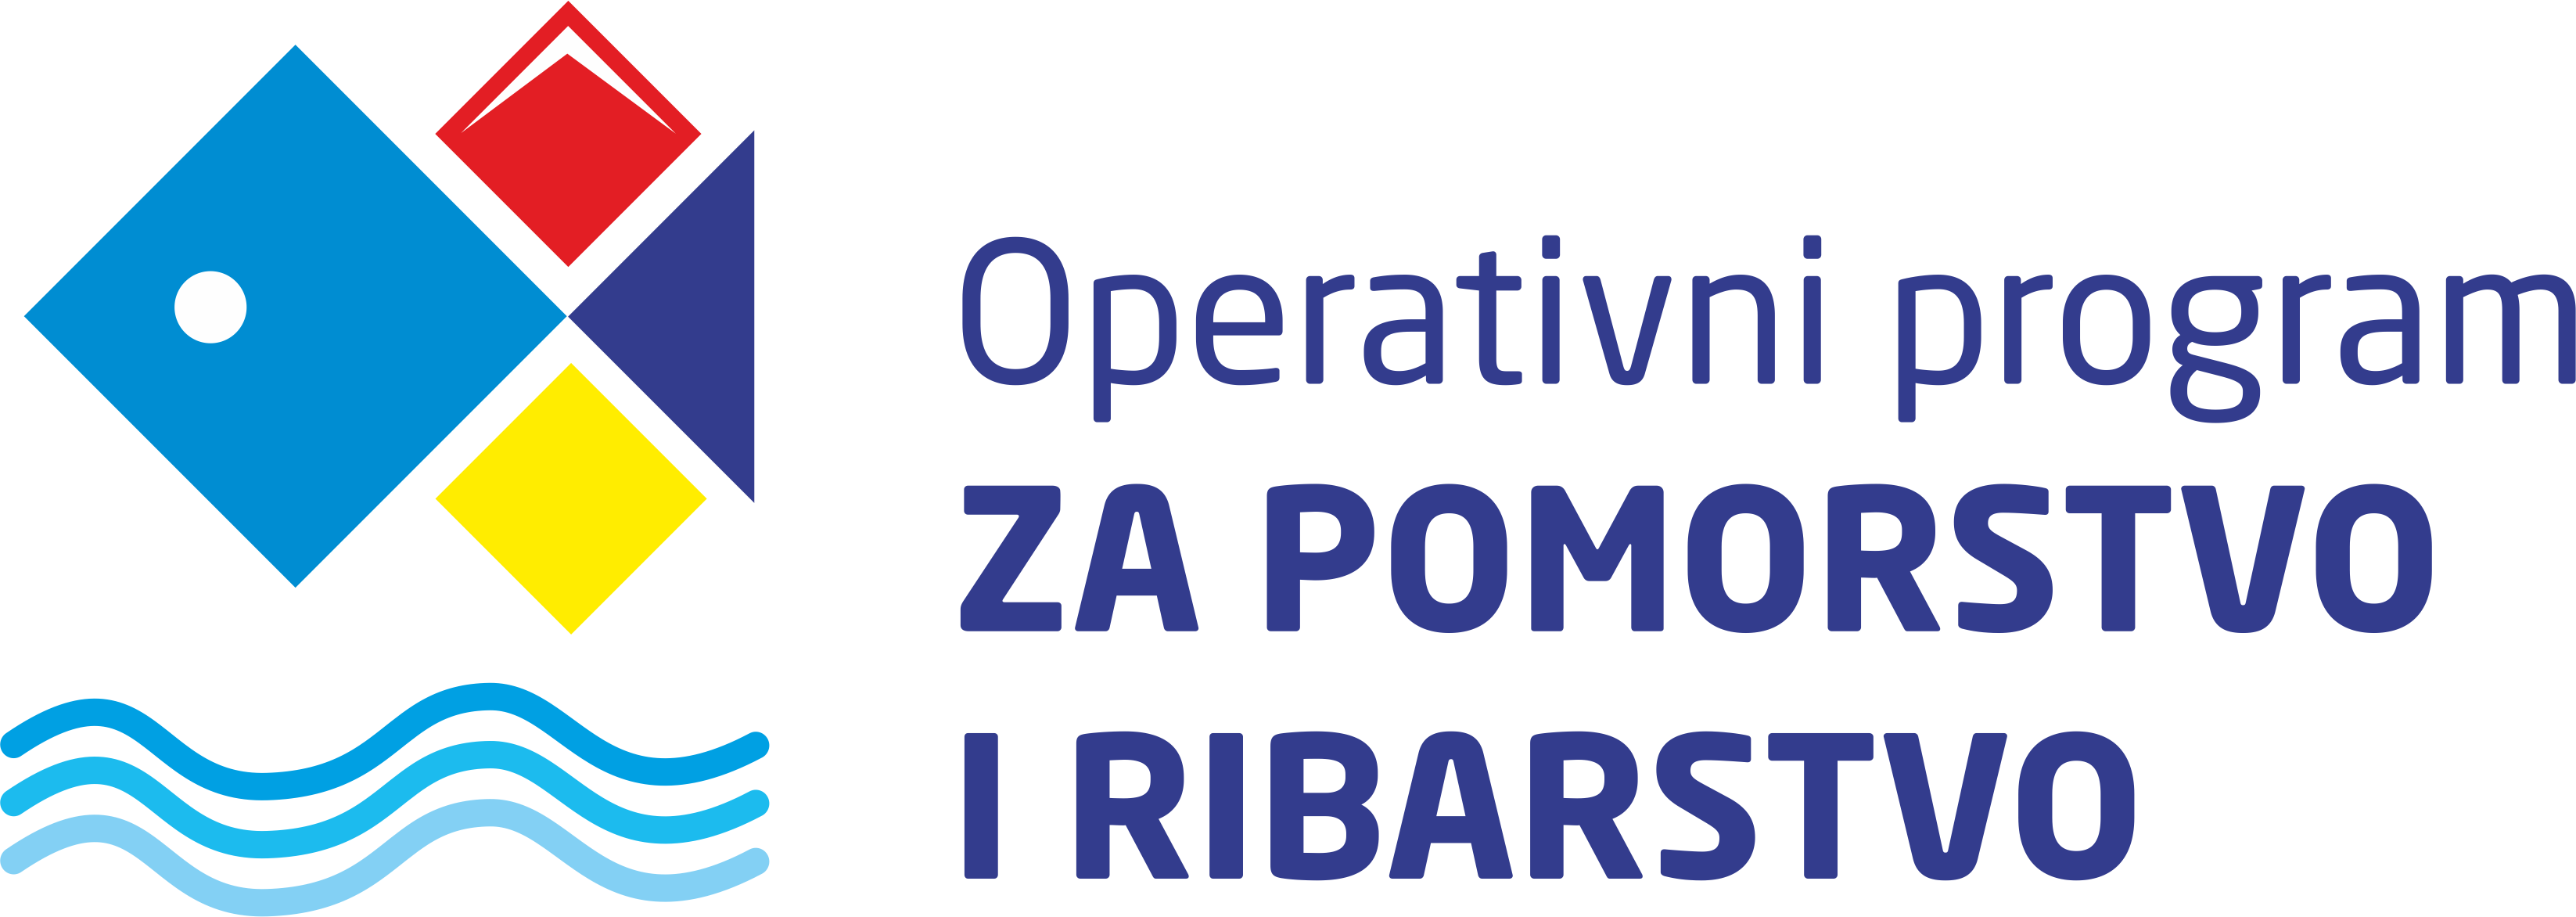 EU Operational Programme for Maritime Affairs and Fisheries of the Republic of Croatia - Partnership between Science and Fisheries